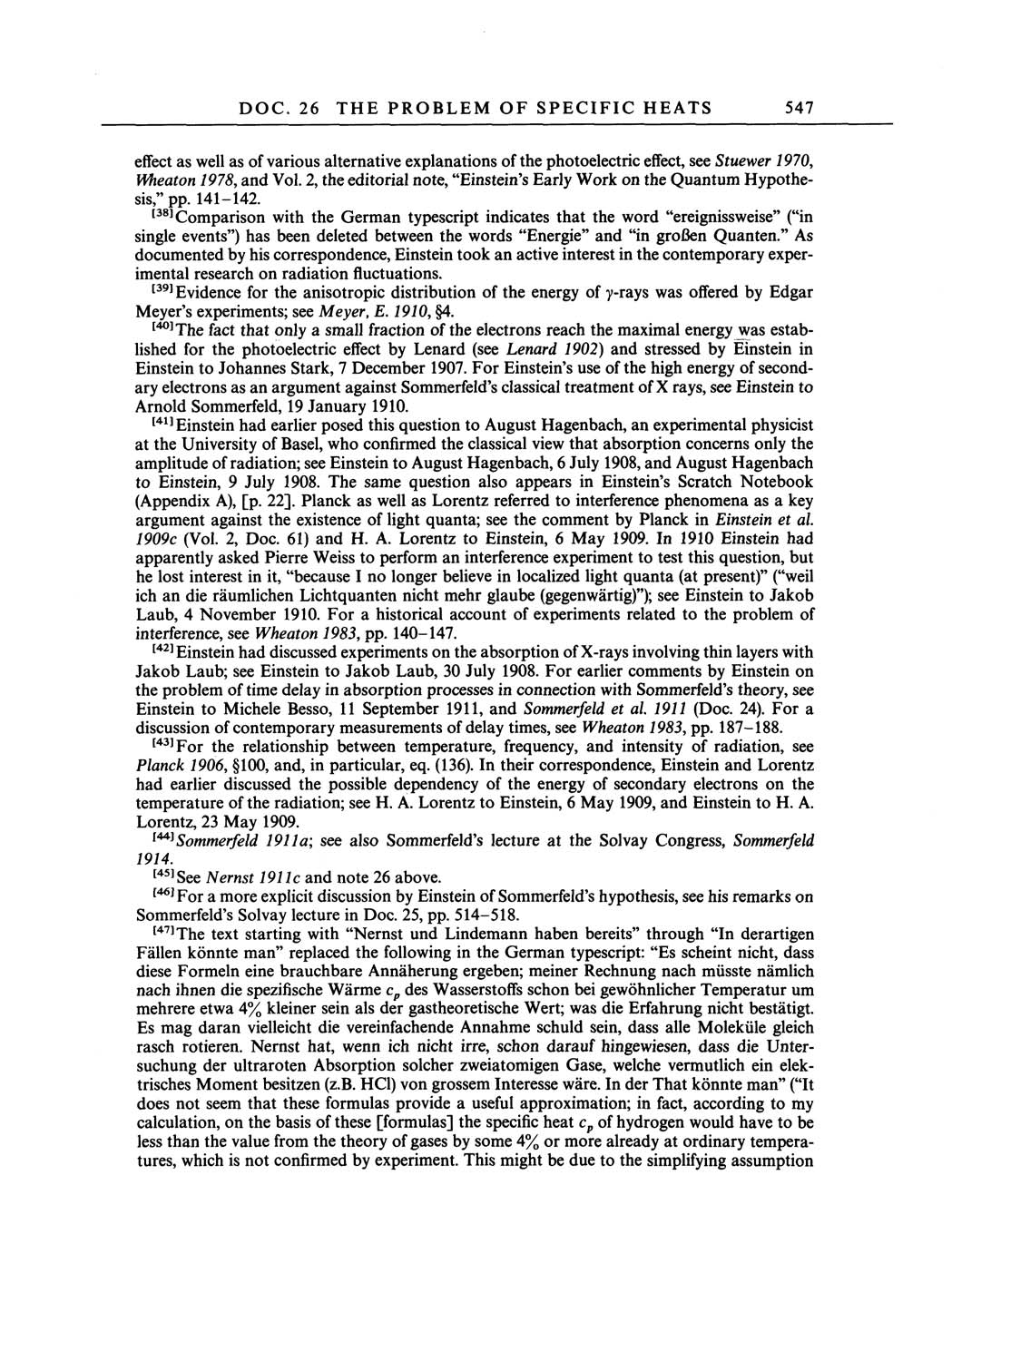 Volume 3: The Swiss Years: Writings 1909-1911 page 547